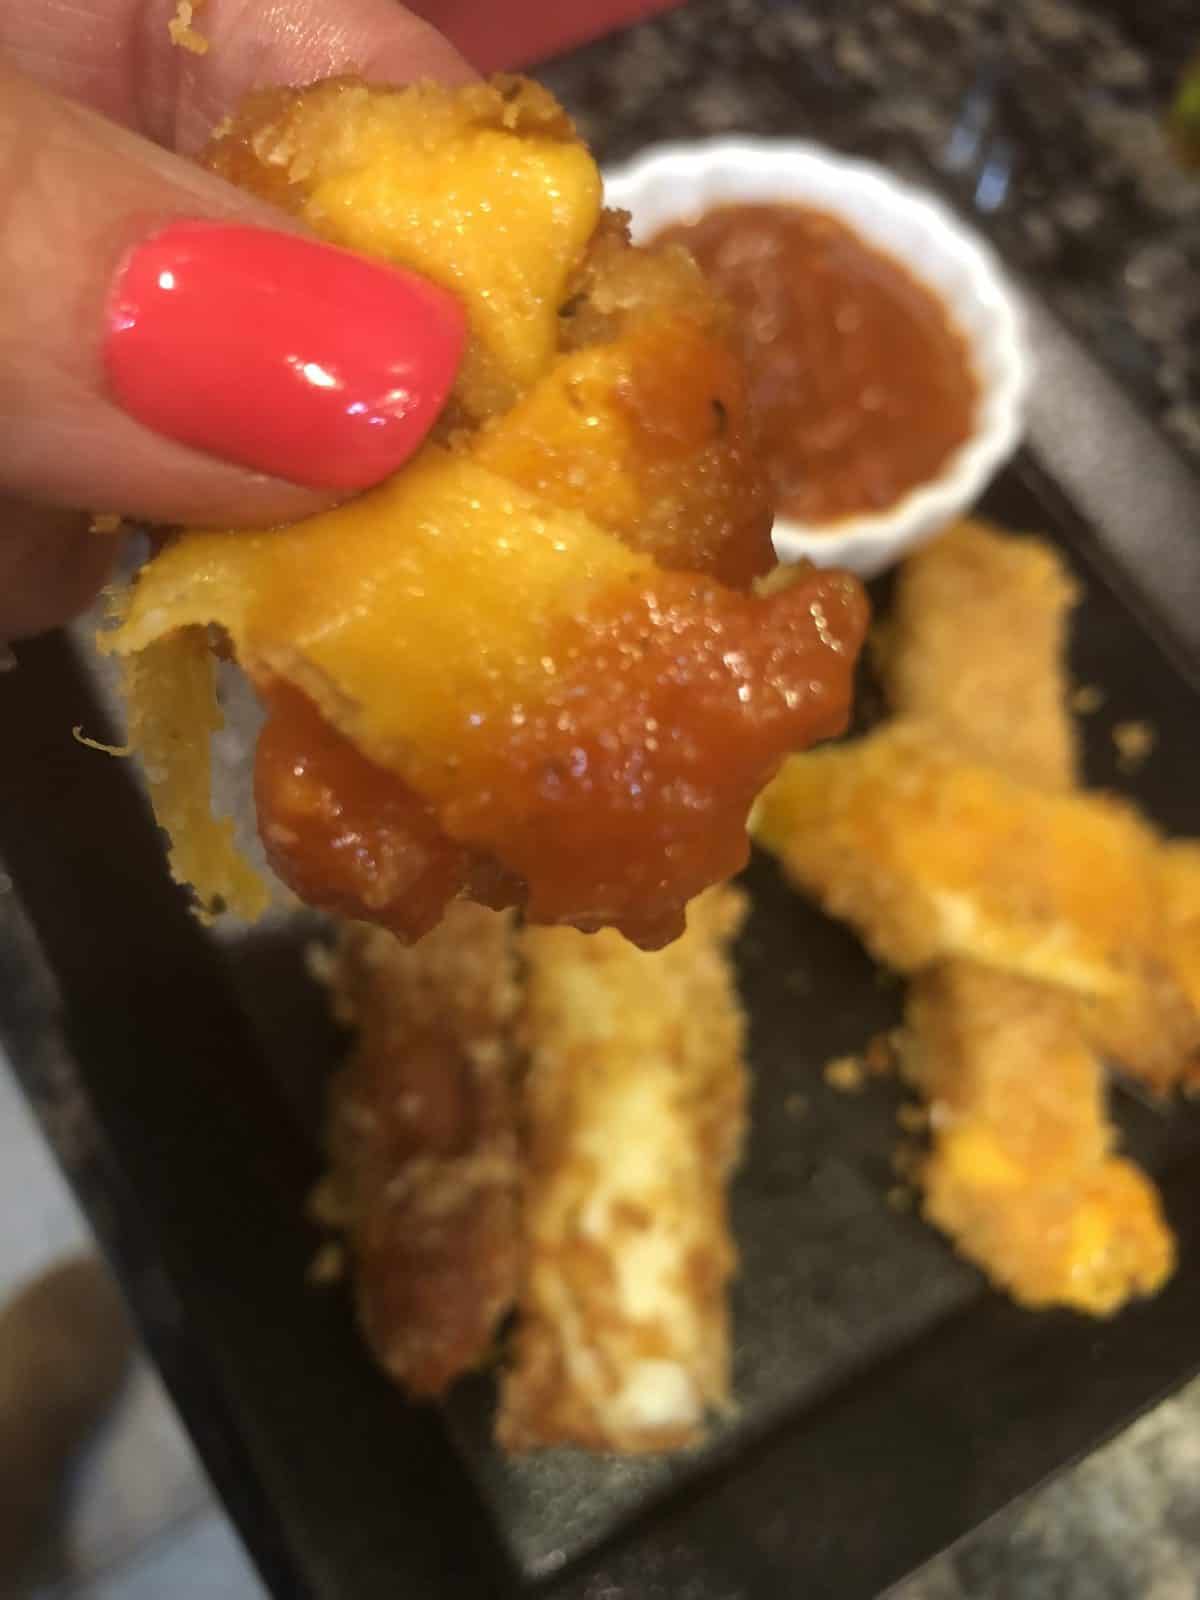 A hand holding a Dipped breaded cheese stick in tomato sauce